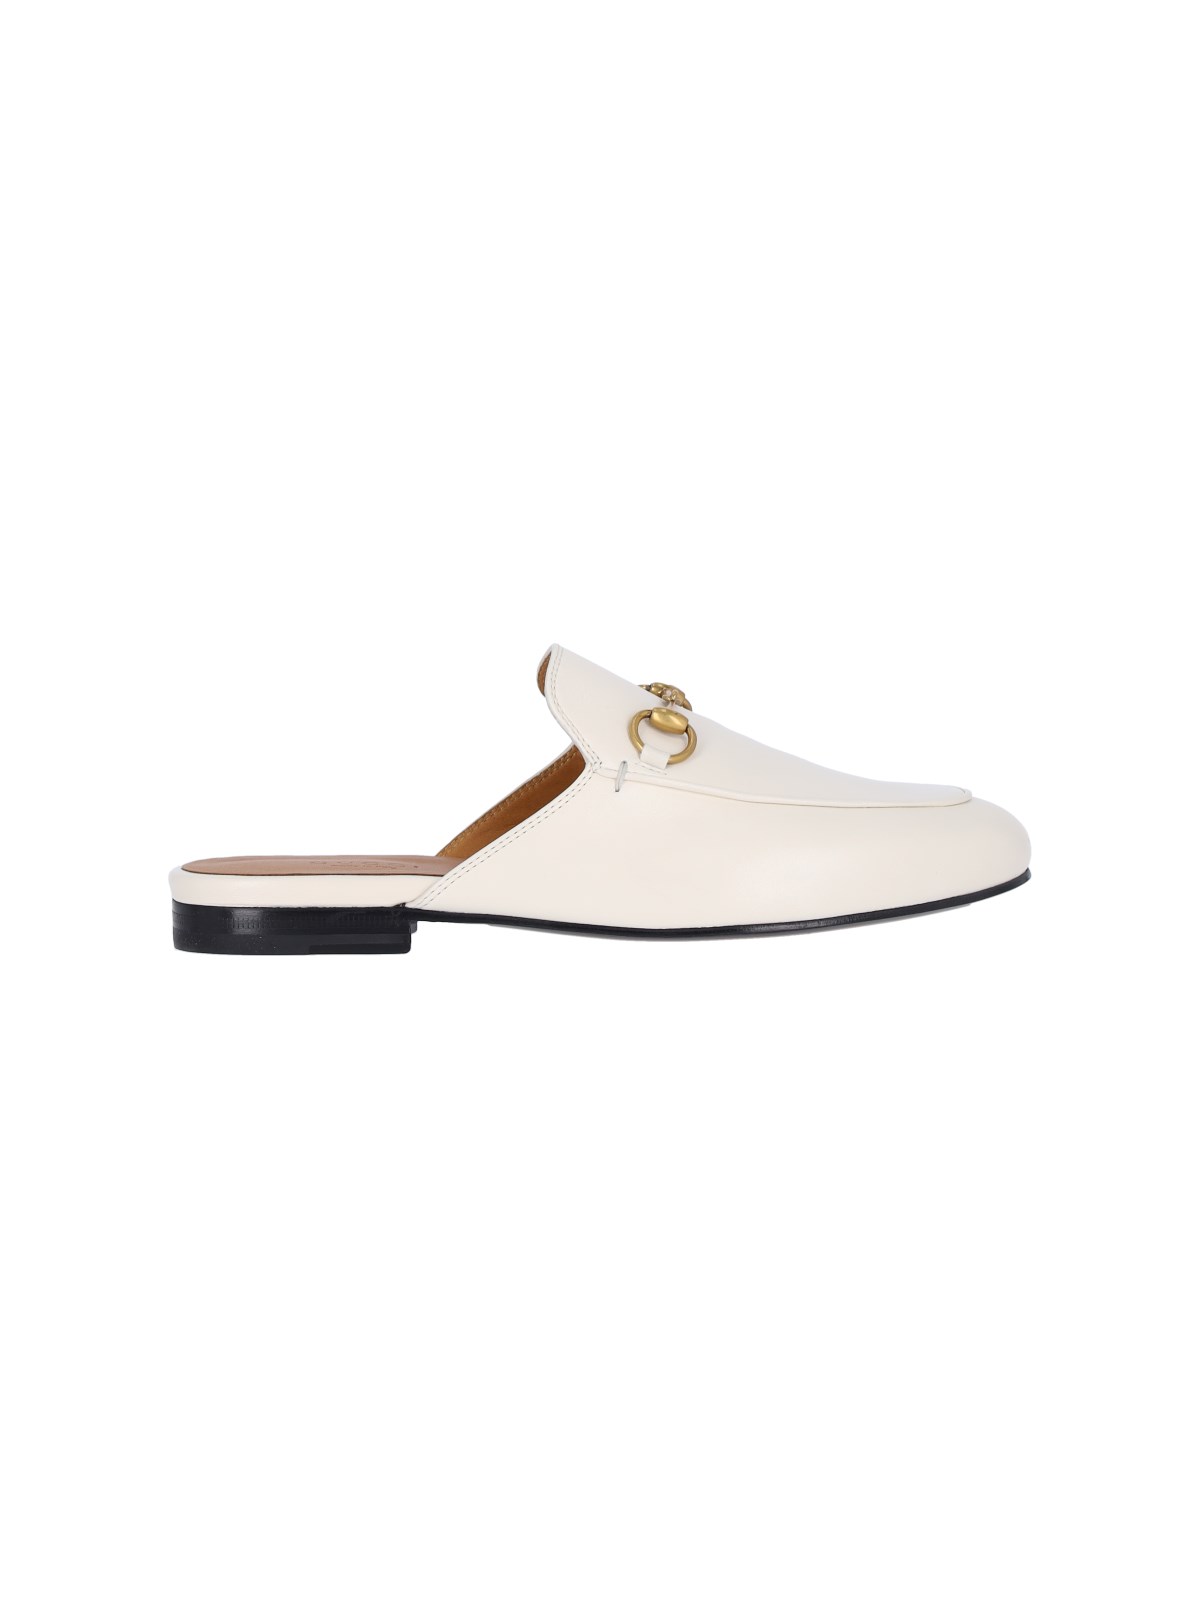 Gucci 'princetown' Slippers In White